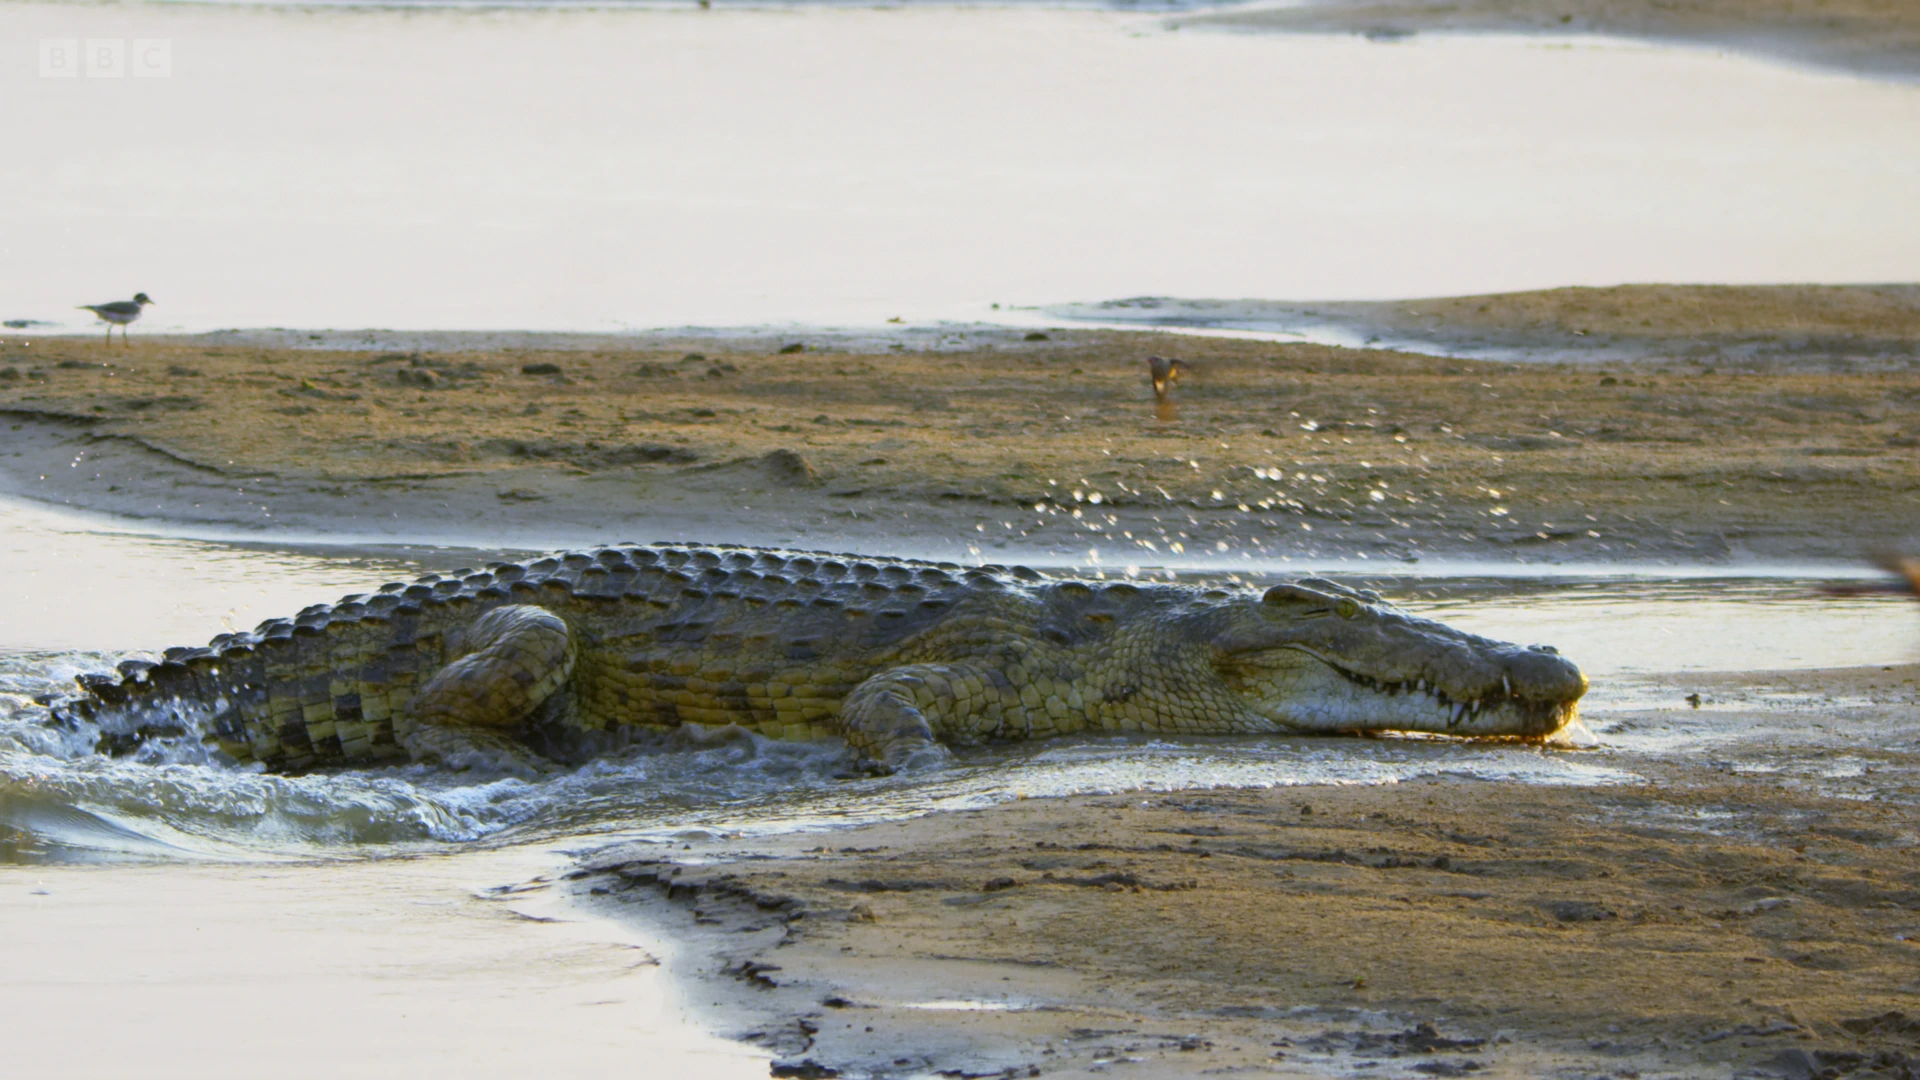 Nile crocodile (Crocodylus niloticus) as shown in A Perfect Planet - Weather